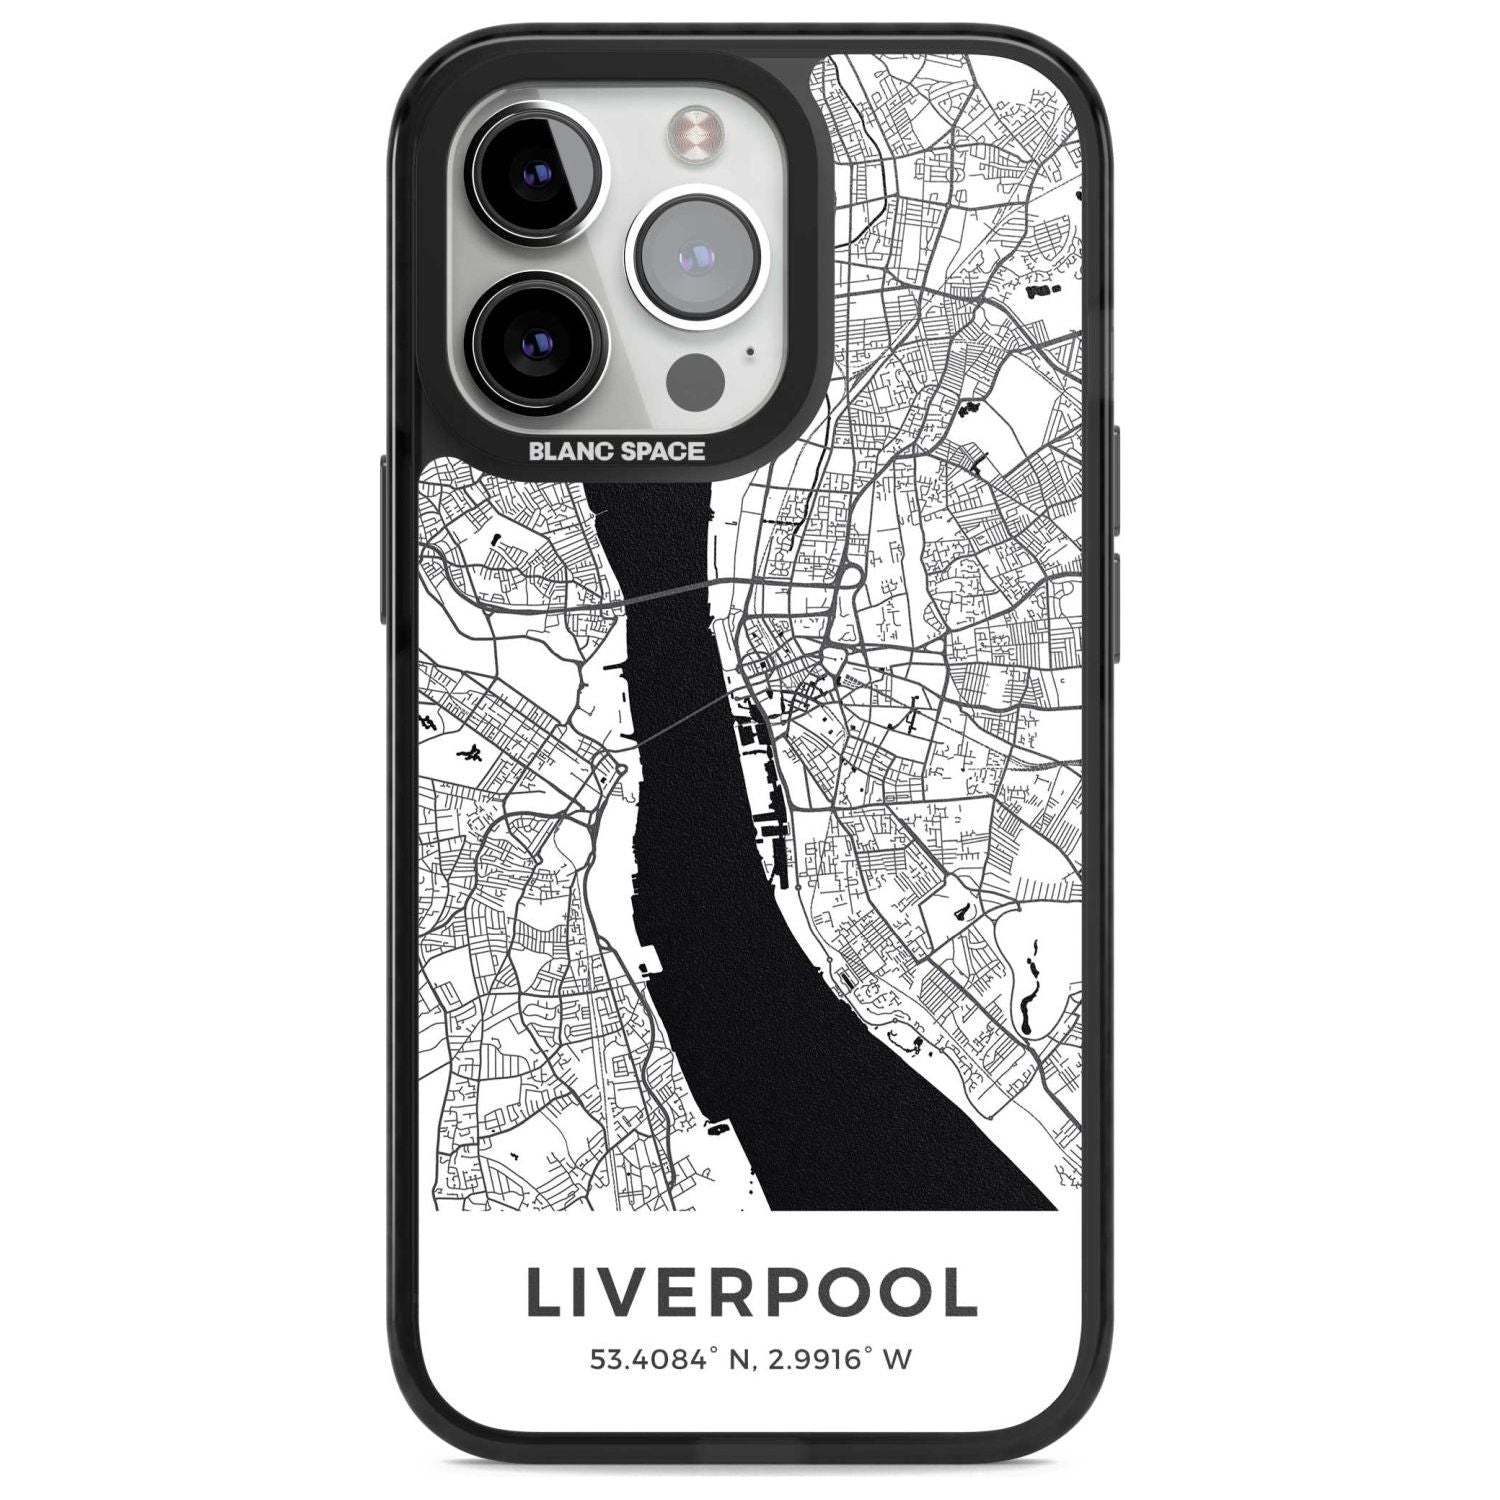 Map of Liverpool, England Phone Case iPhone 15 Pro Max / Magsafe Black Impact Case,iPhone 15 Pro / Magsafe Black Impact Case,iPhone 14 Pro Max / Magsafe Black Impact Case,iPhone 14 Pro / Magsafe Black Impact Case,iPhone 13 Pro / Magsafe Black Impact Case Blanc Space